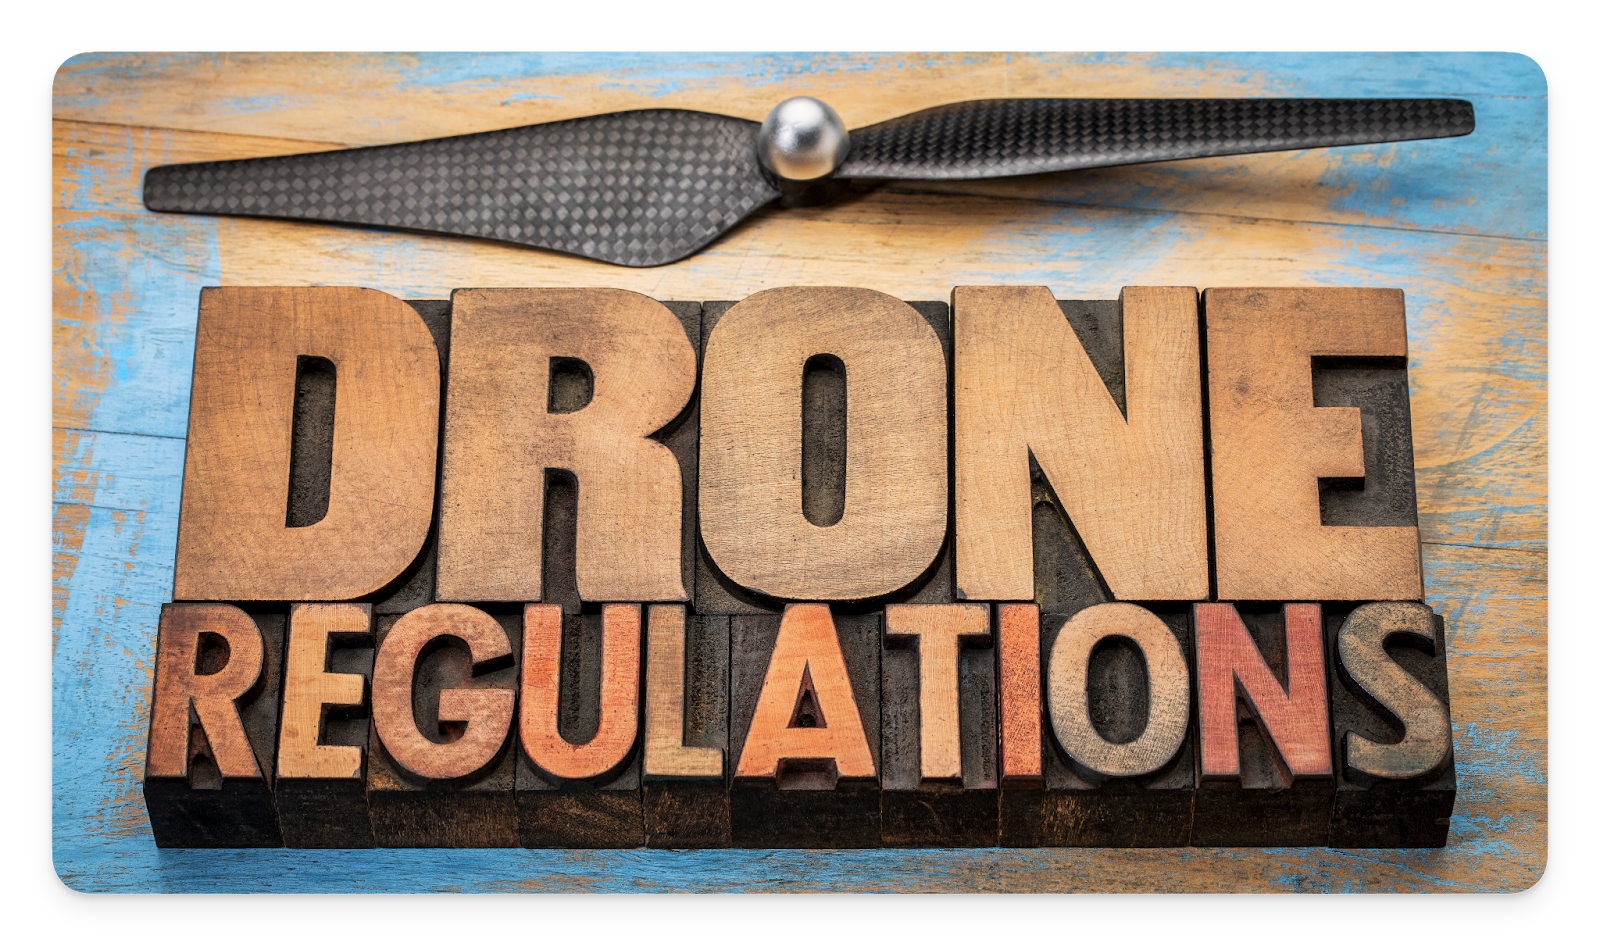 A board with the words "Drone Regulations" on it.